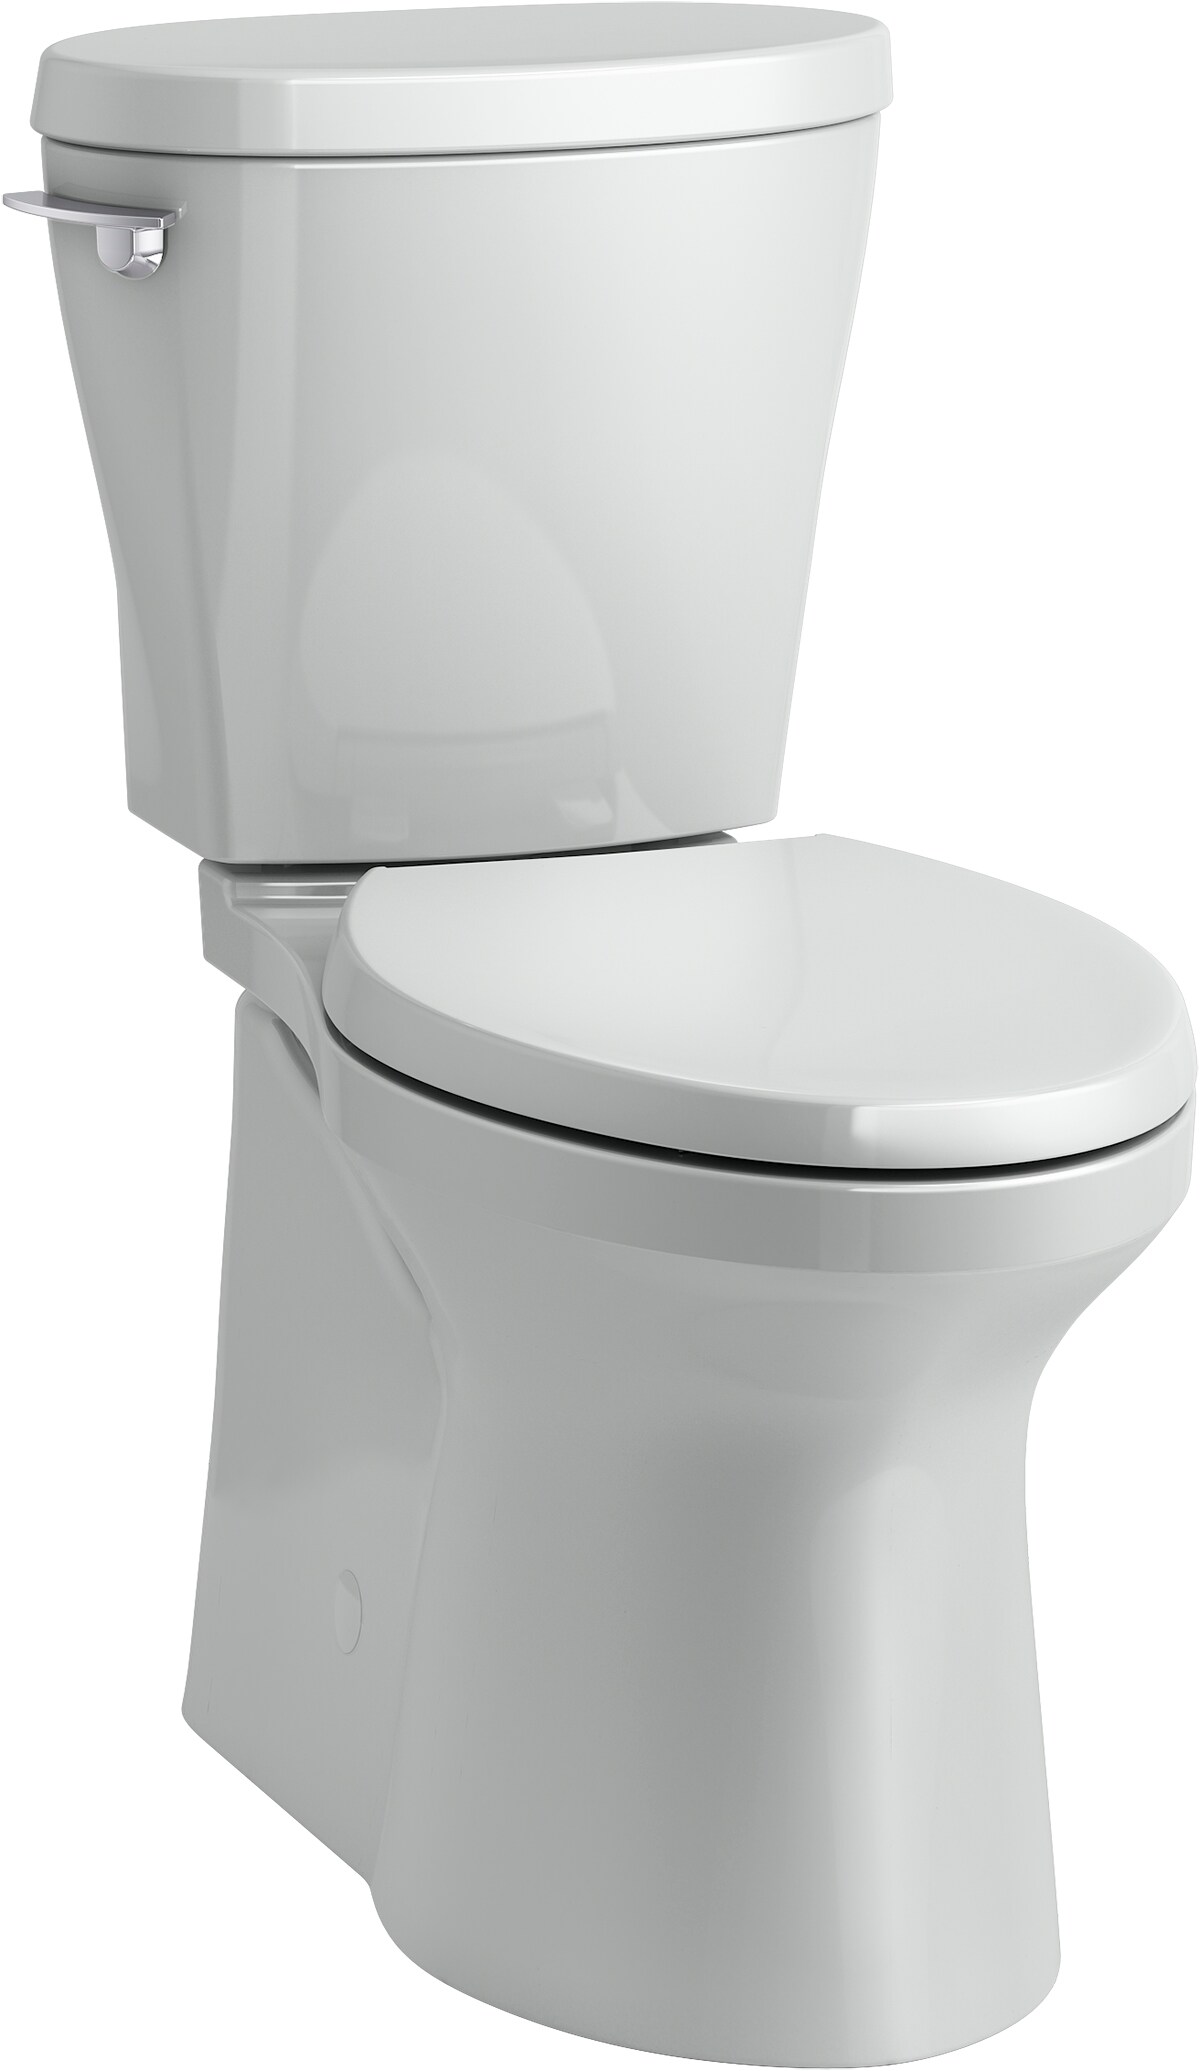 Vive Toilet wall hung bowl and seat cover combo – Kohler Online Store